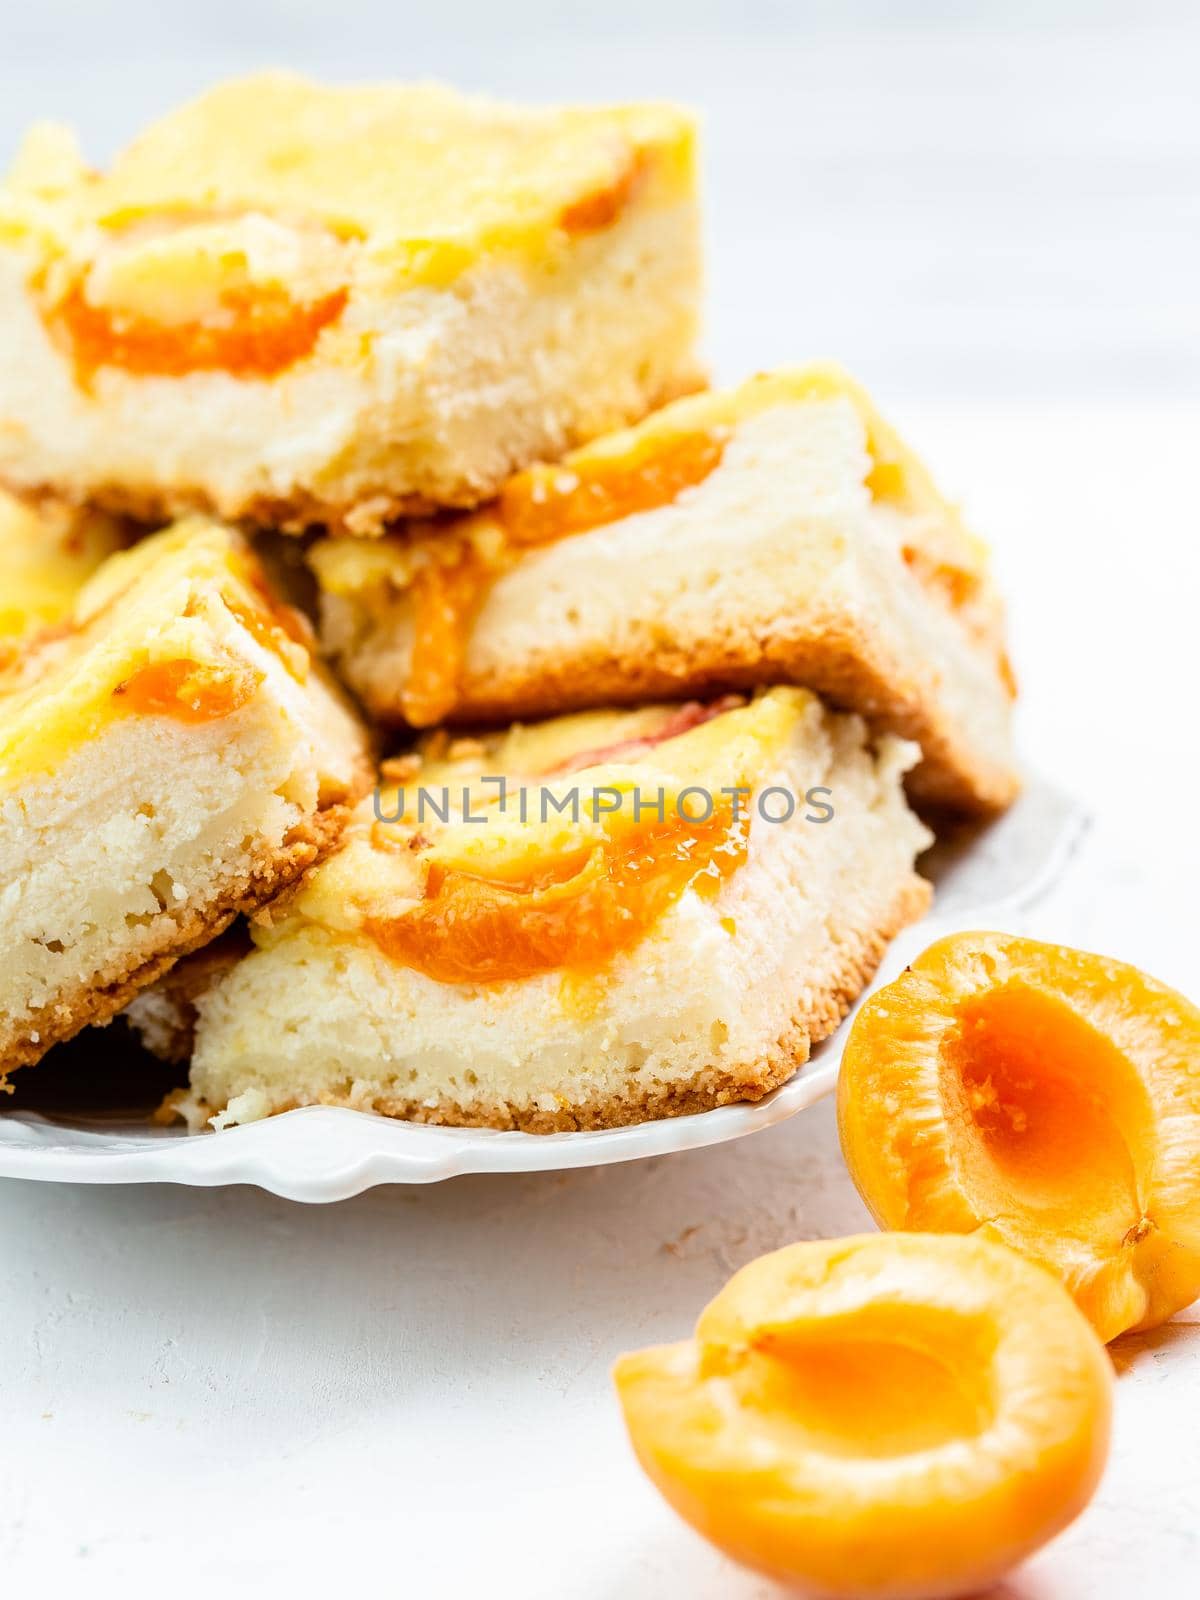 Slice of baked apricot and cheese tart dessert by Syvanych